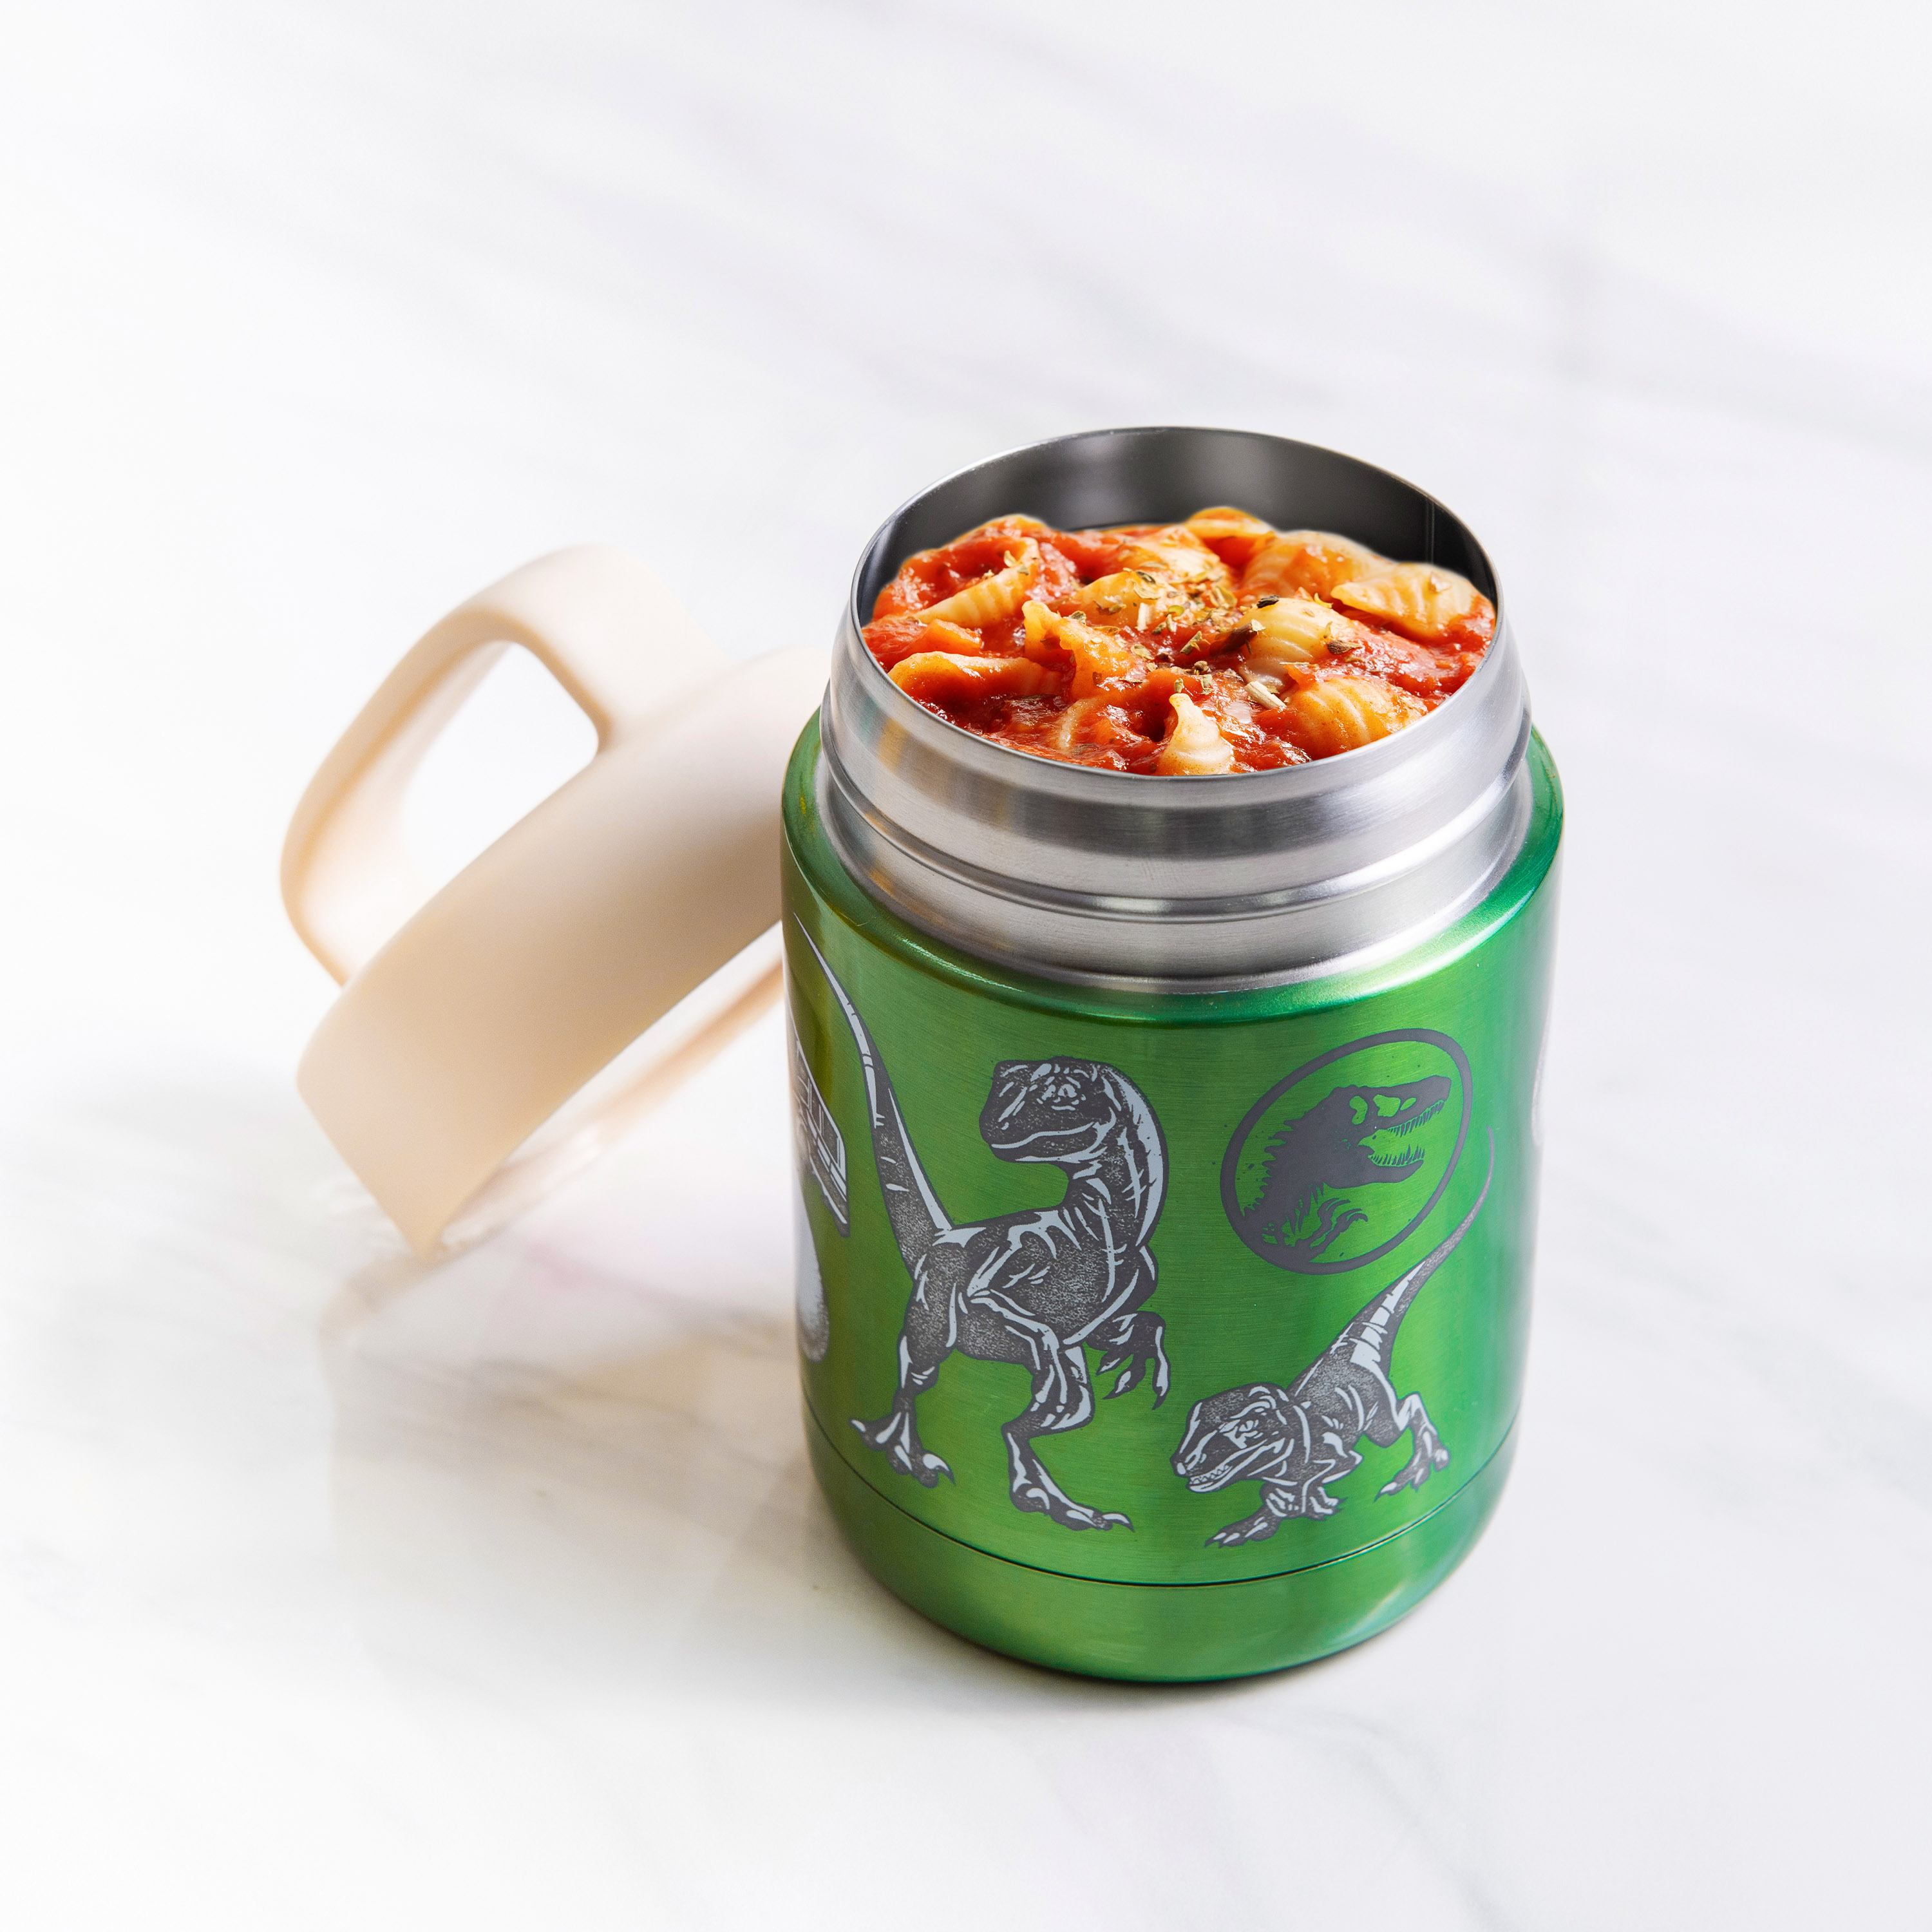 Jurassic World Dominion Reusable Vacuum Insulated Stainless Steel Food Container, T-Rex slideshow image 5